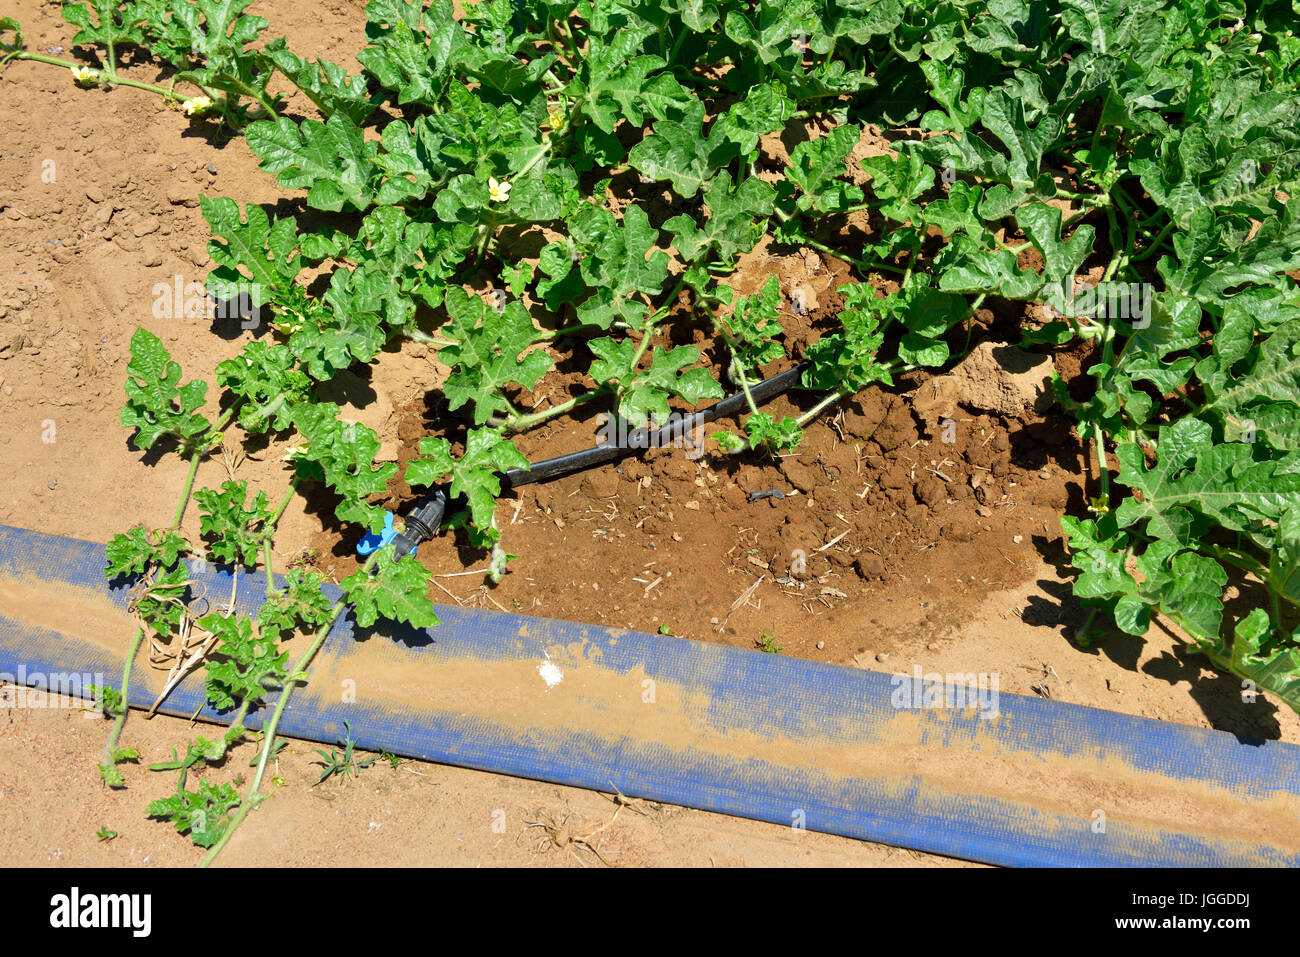 Trickle irrigation system for water conservation watering young watermelon plants in field, Italy Stock Photo